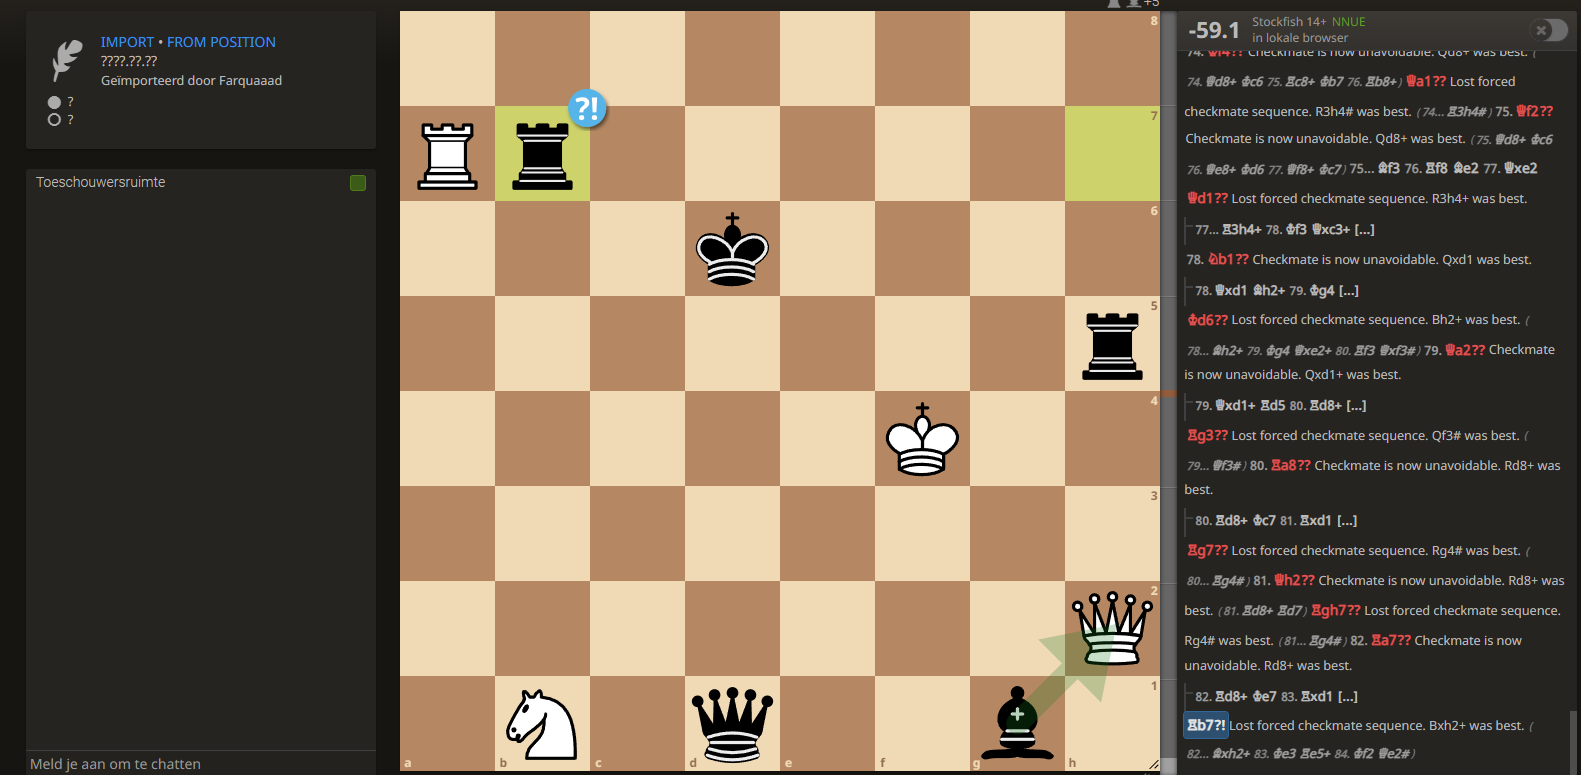 A screenshot of the game on lichess.org, showing a chess board